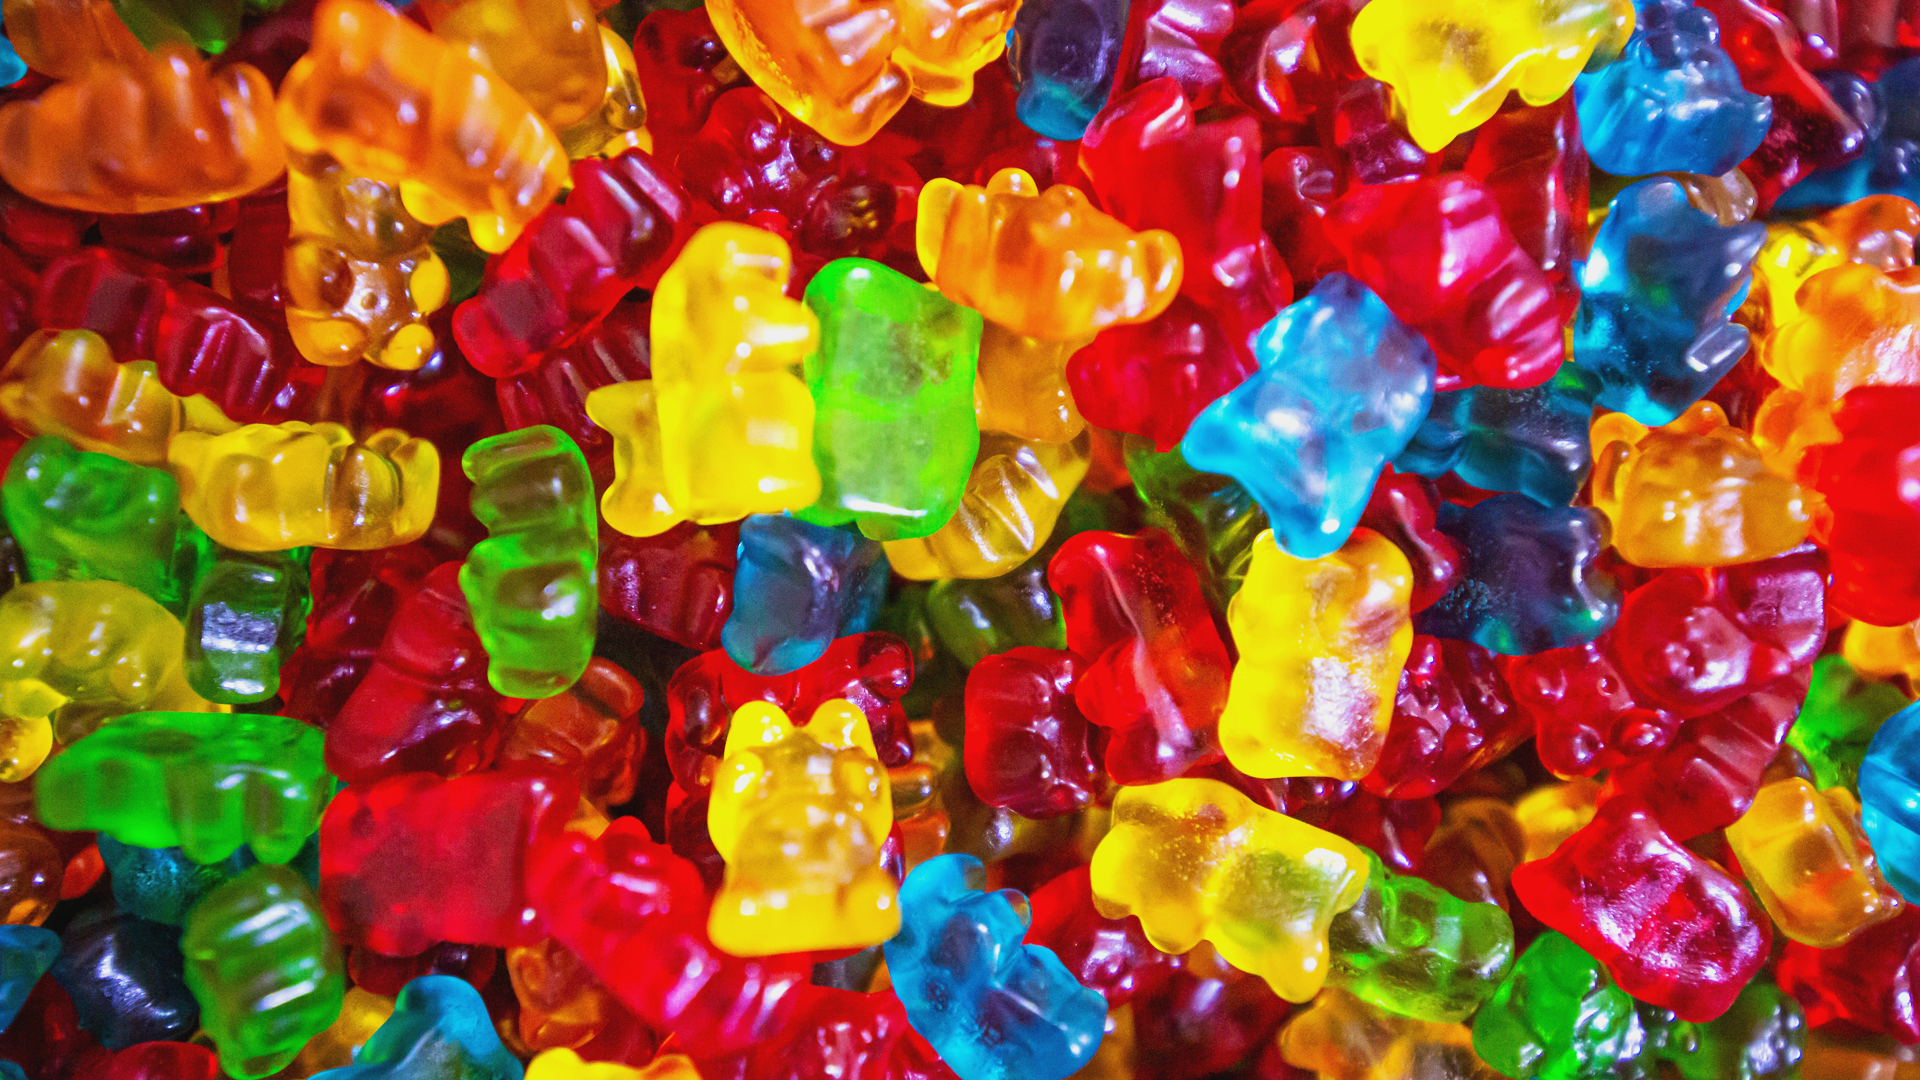 Wind turbines may soon be recycled into gummy bears